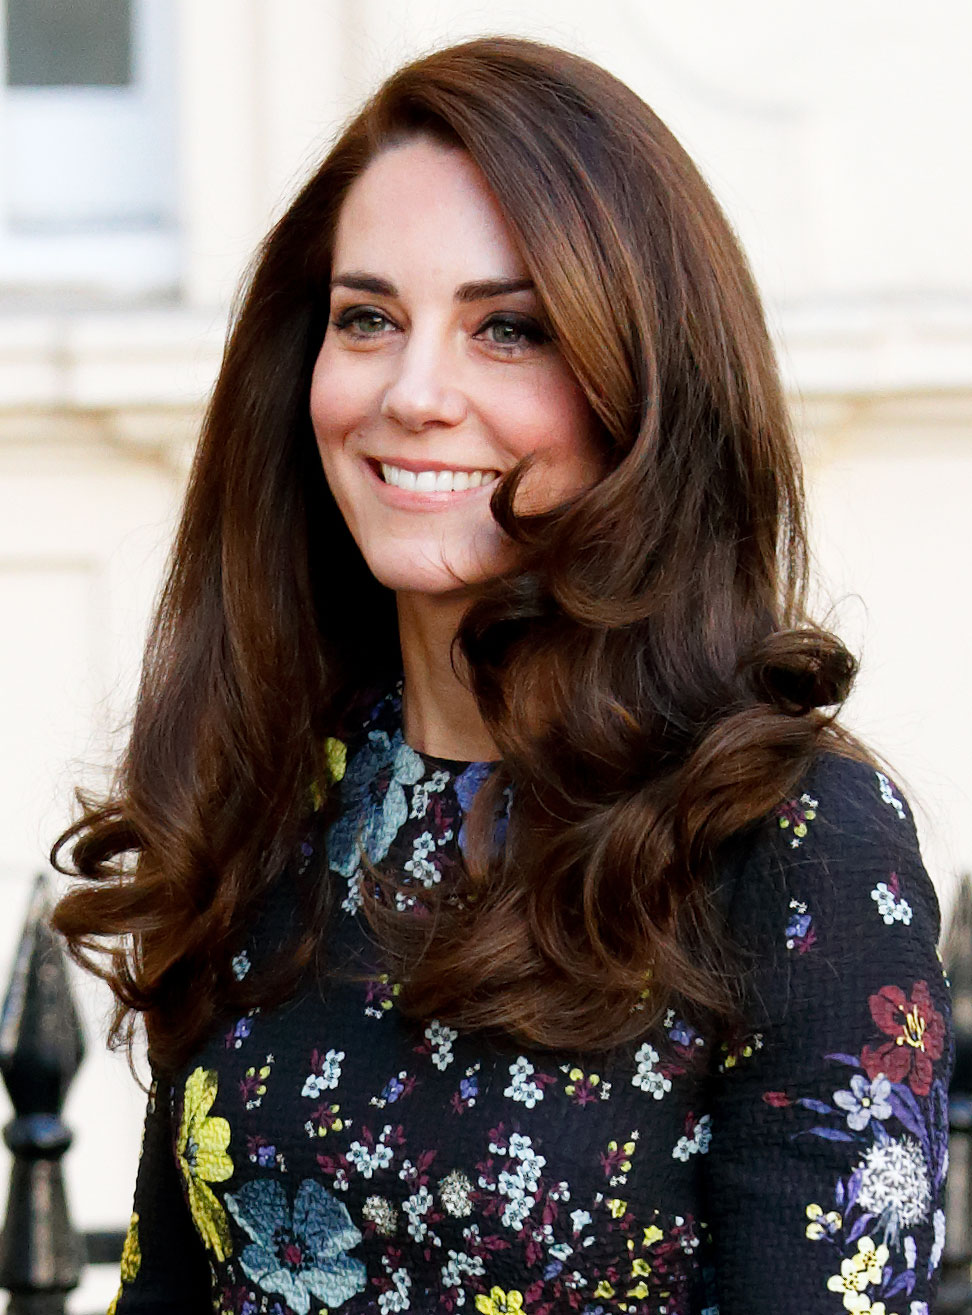 Kate Middletons Best Hair Looks Through the Years